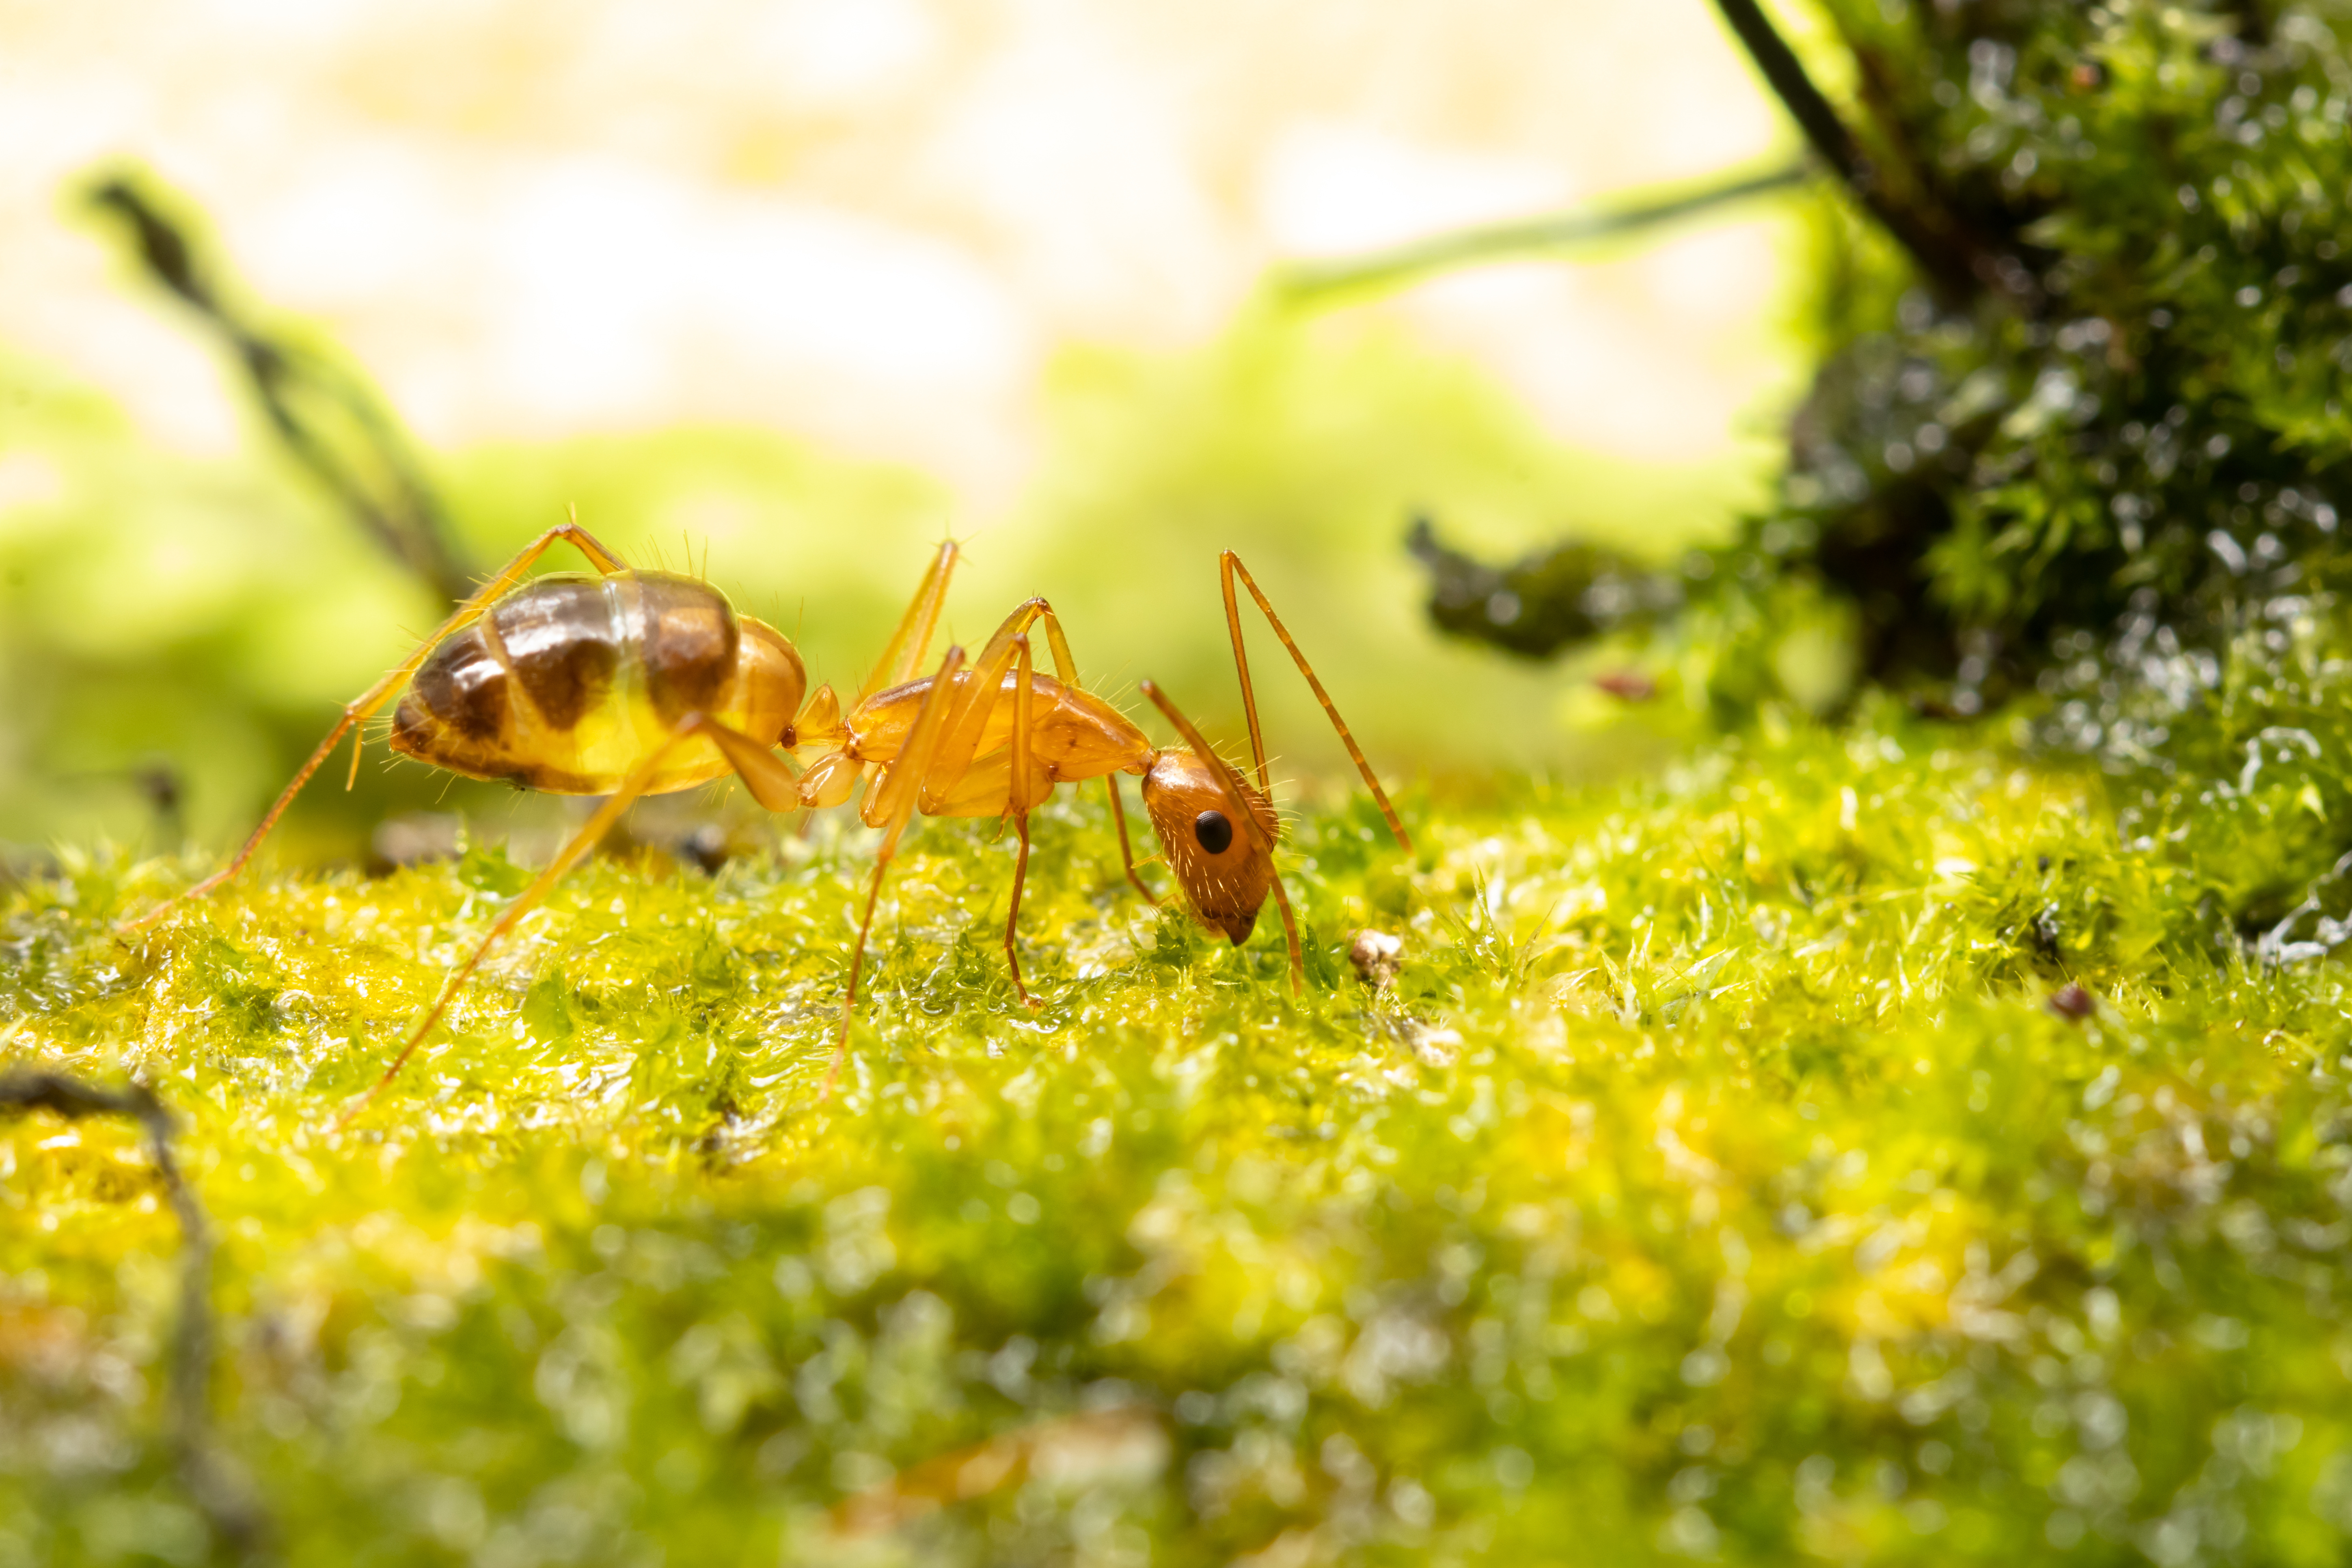 A closeup image of a crazy ant - GGA Pest Management offers extermination services for crazy ants in Temple, TX.